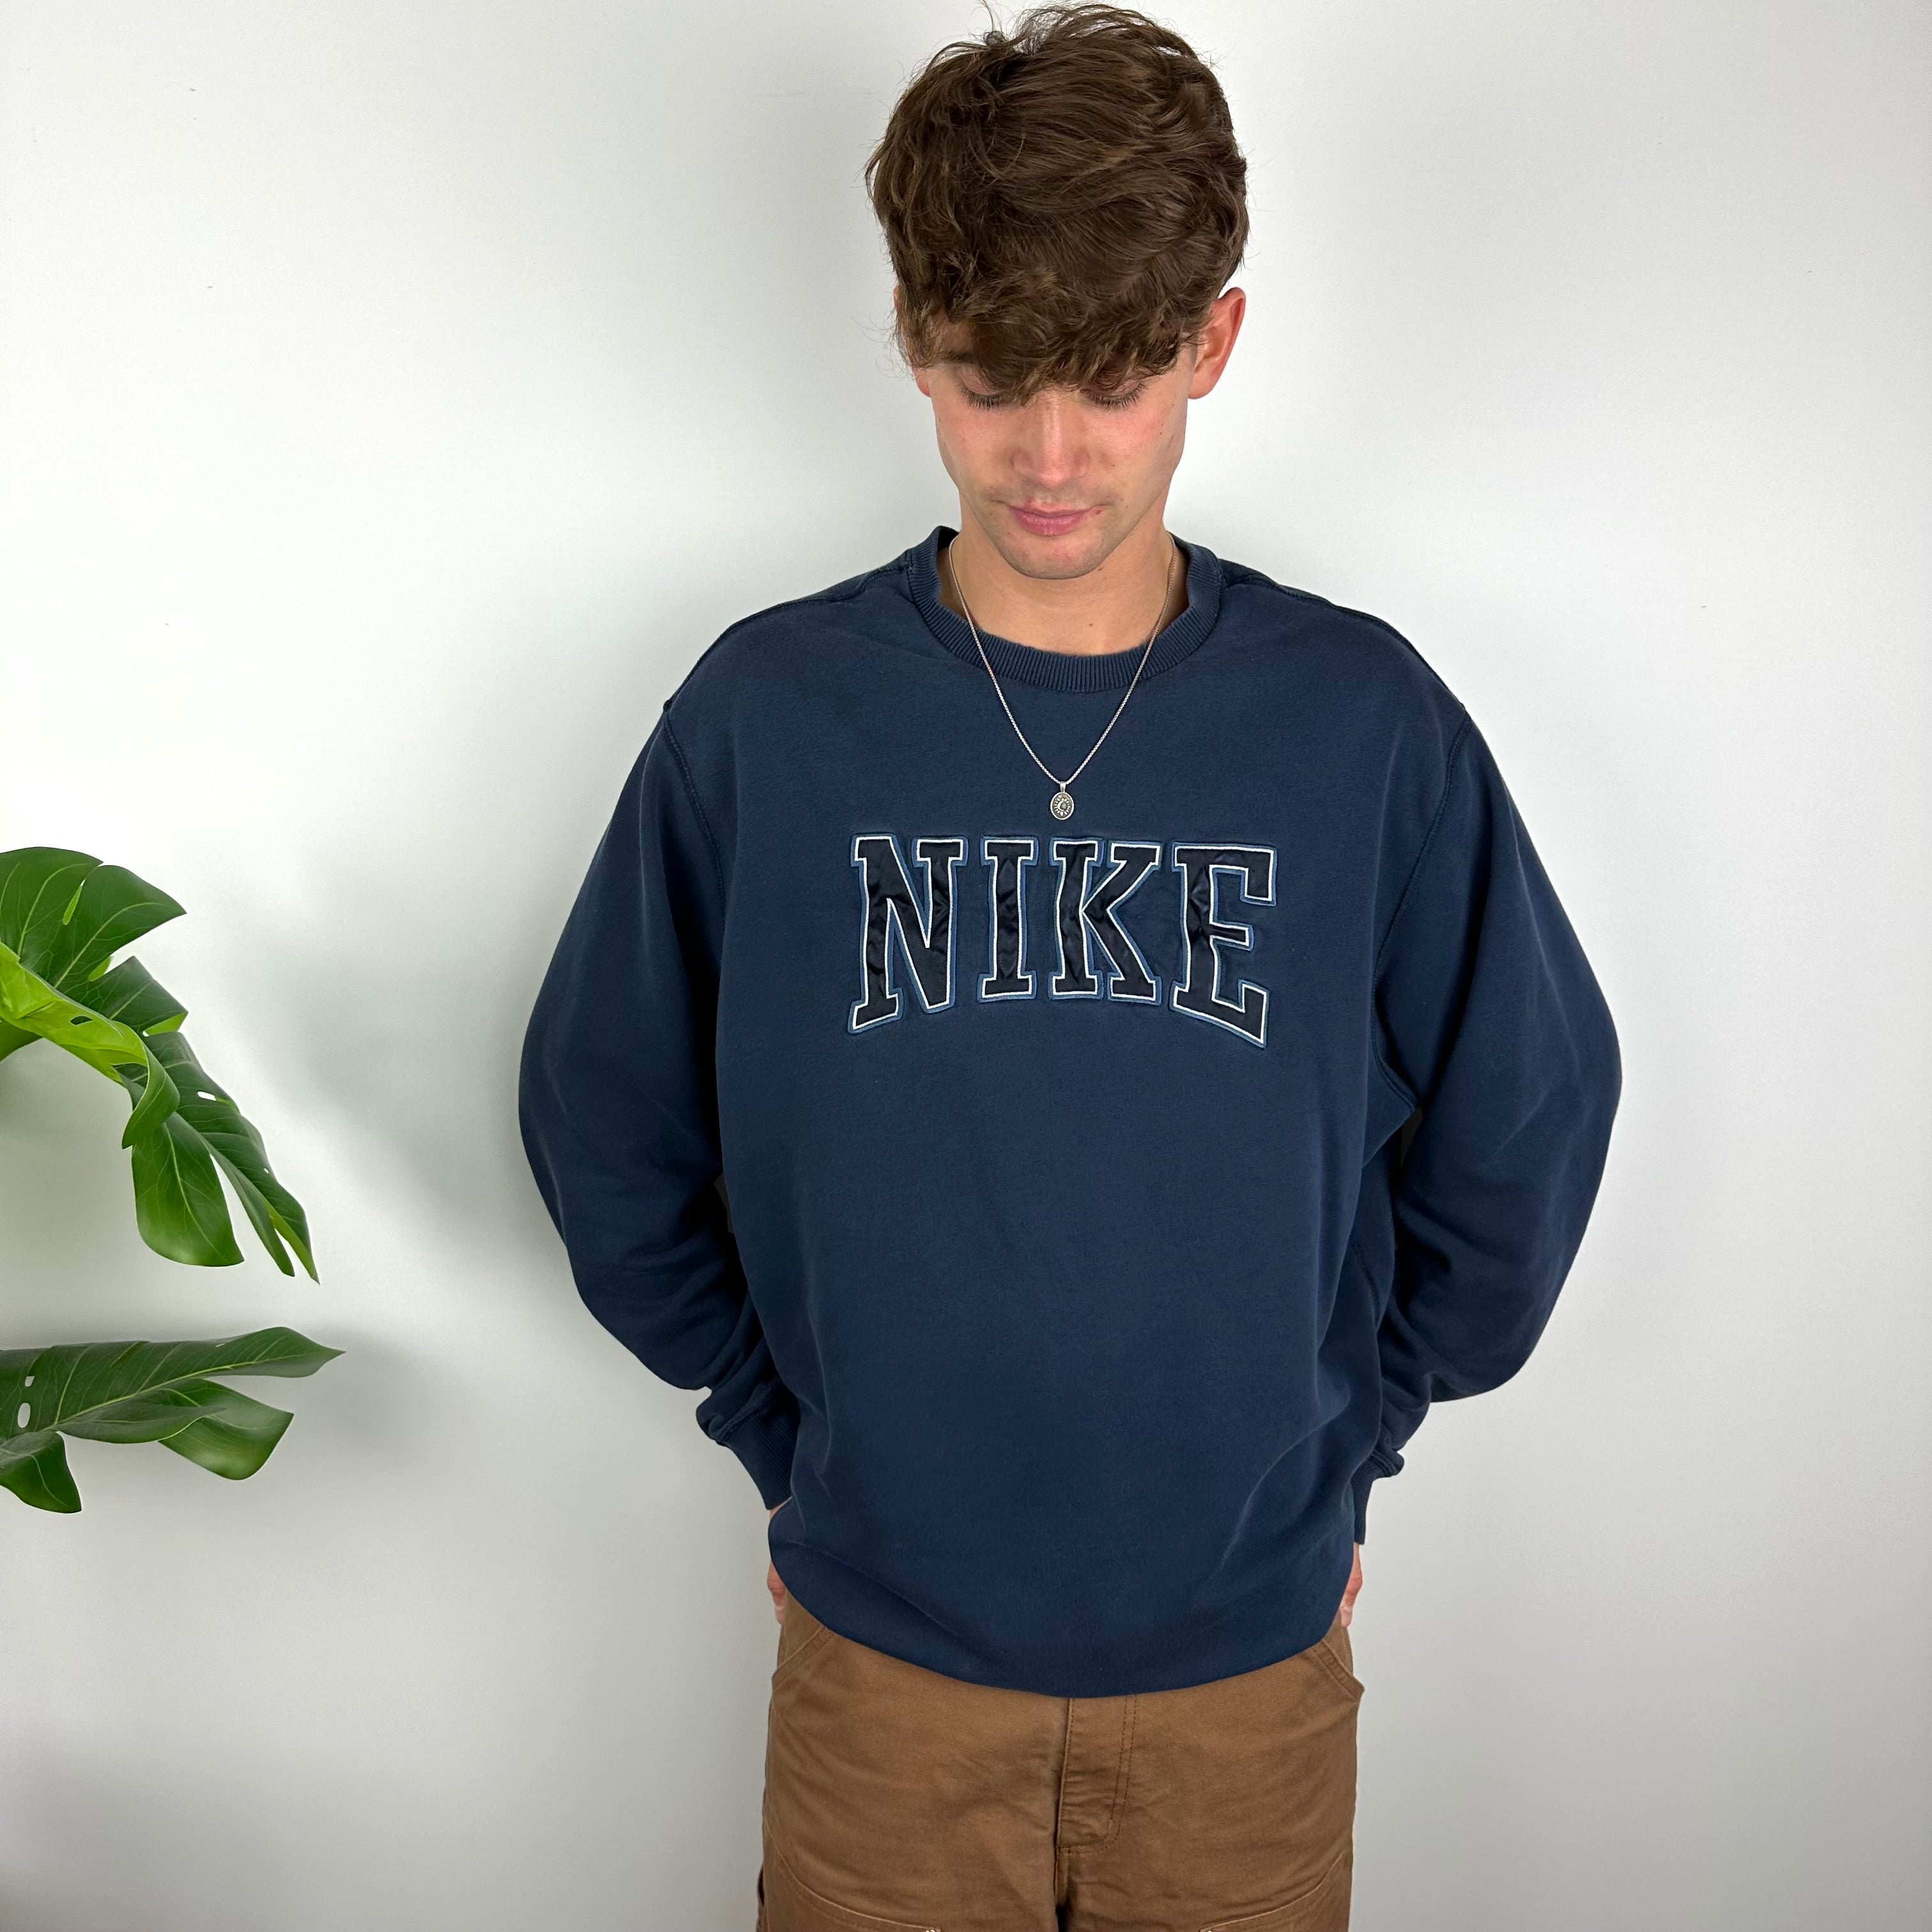 Nike RARE Navy Embroidered Spell Out Sweatshirt (XL)